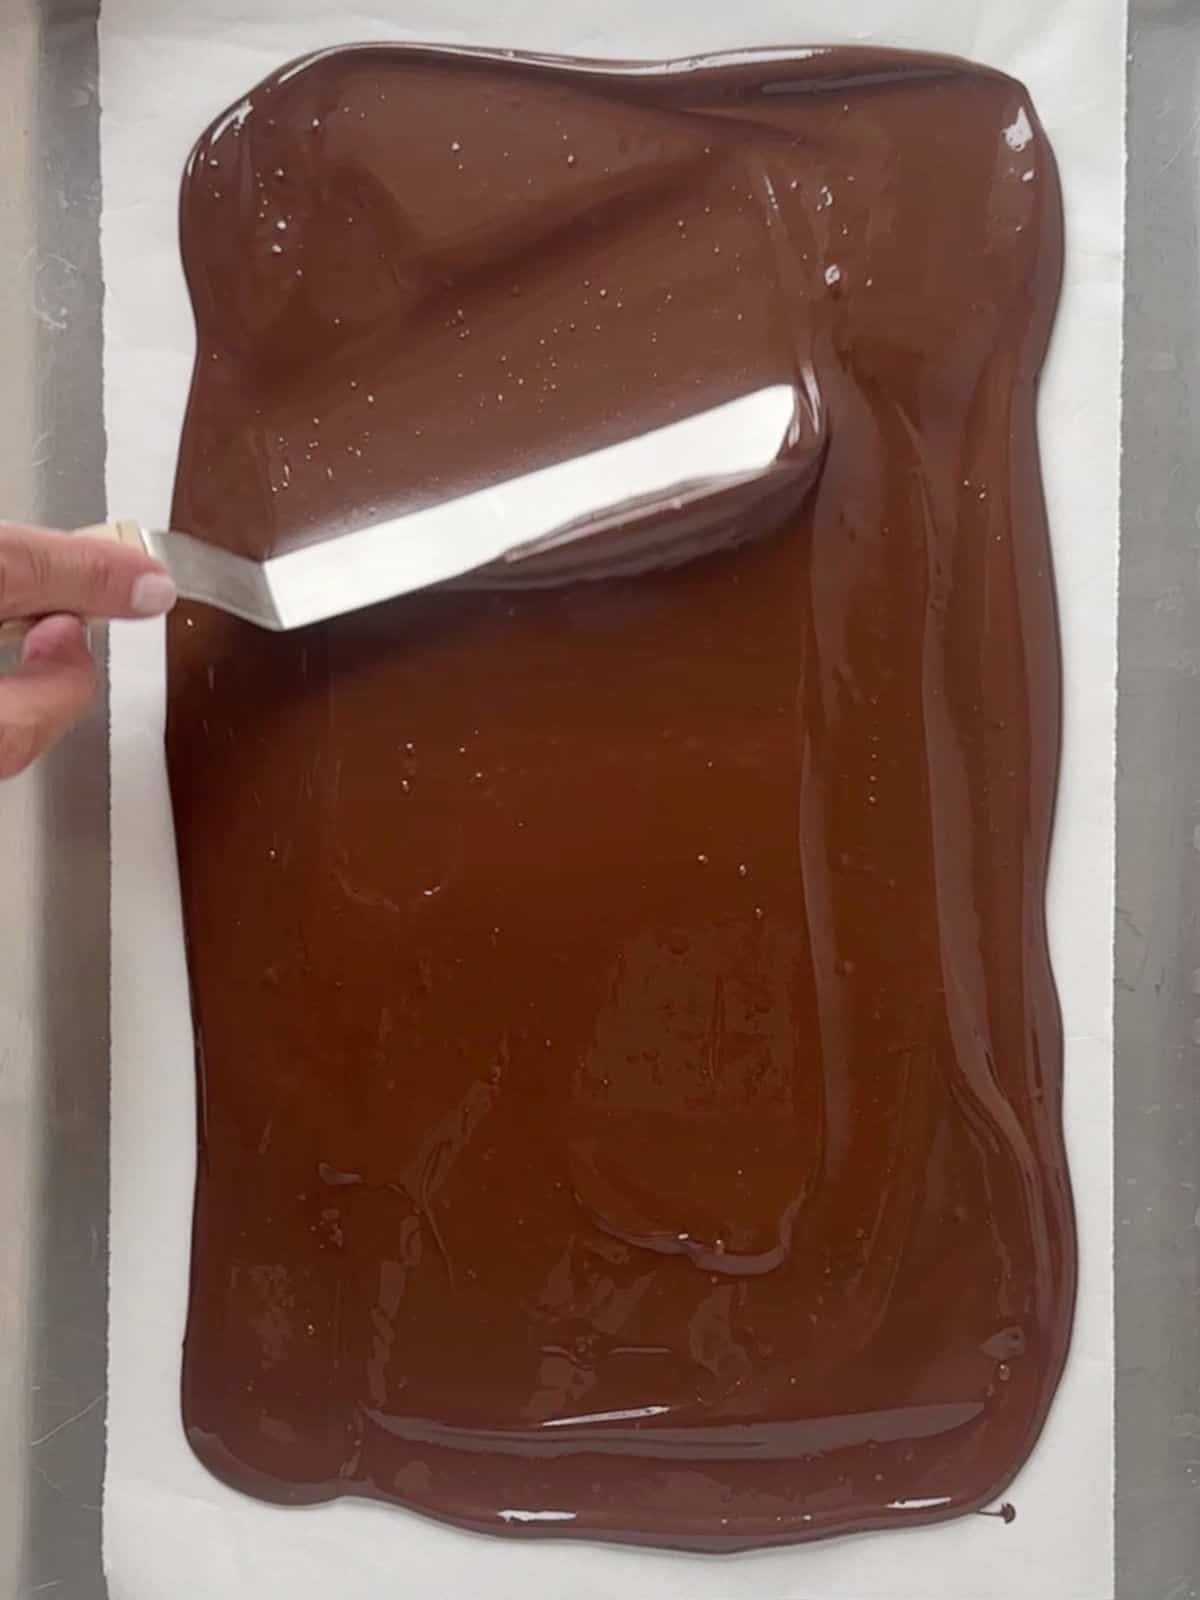 Spreading melted dark chocolate with an offset spatula on white parchment paper.